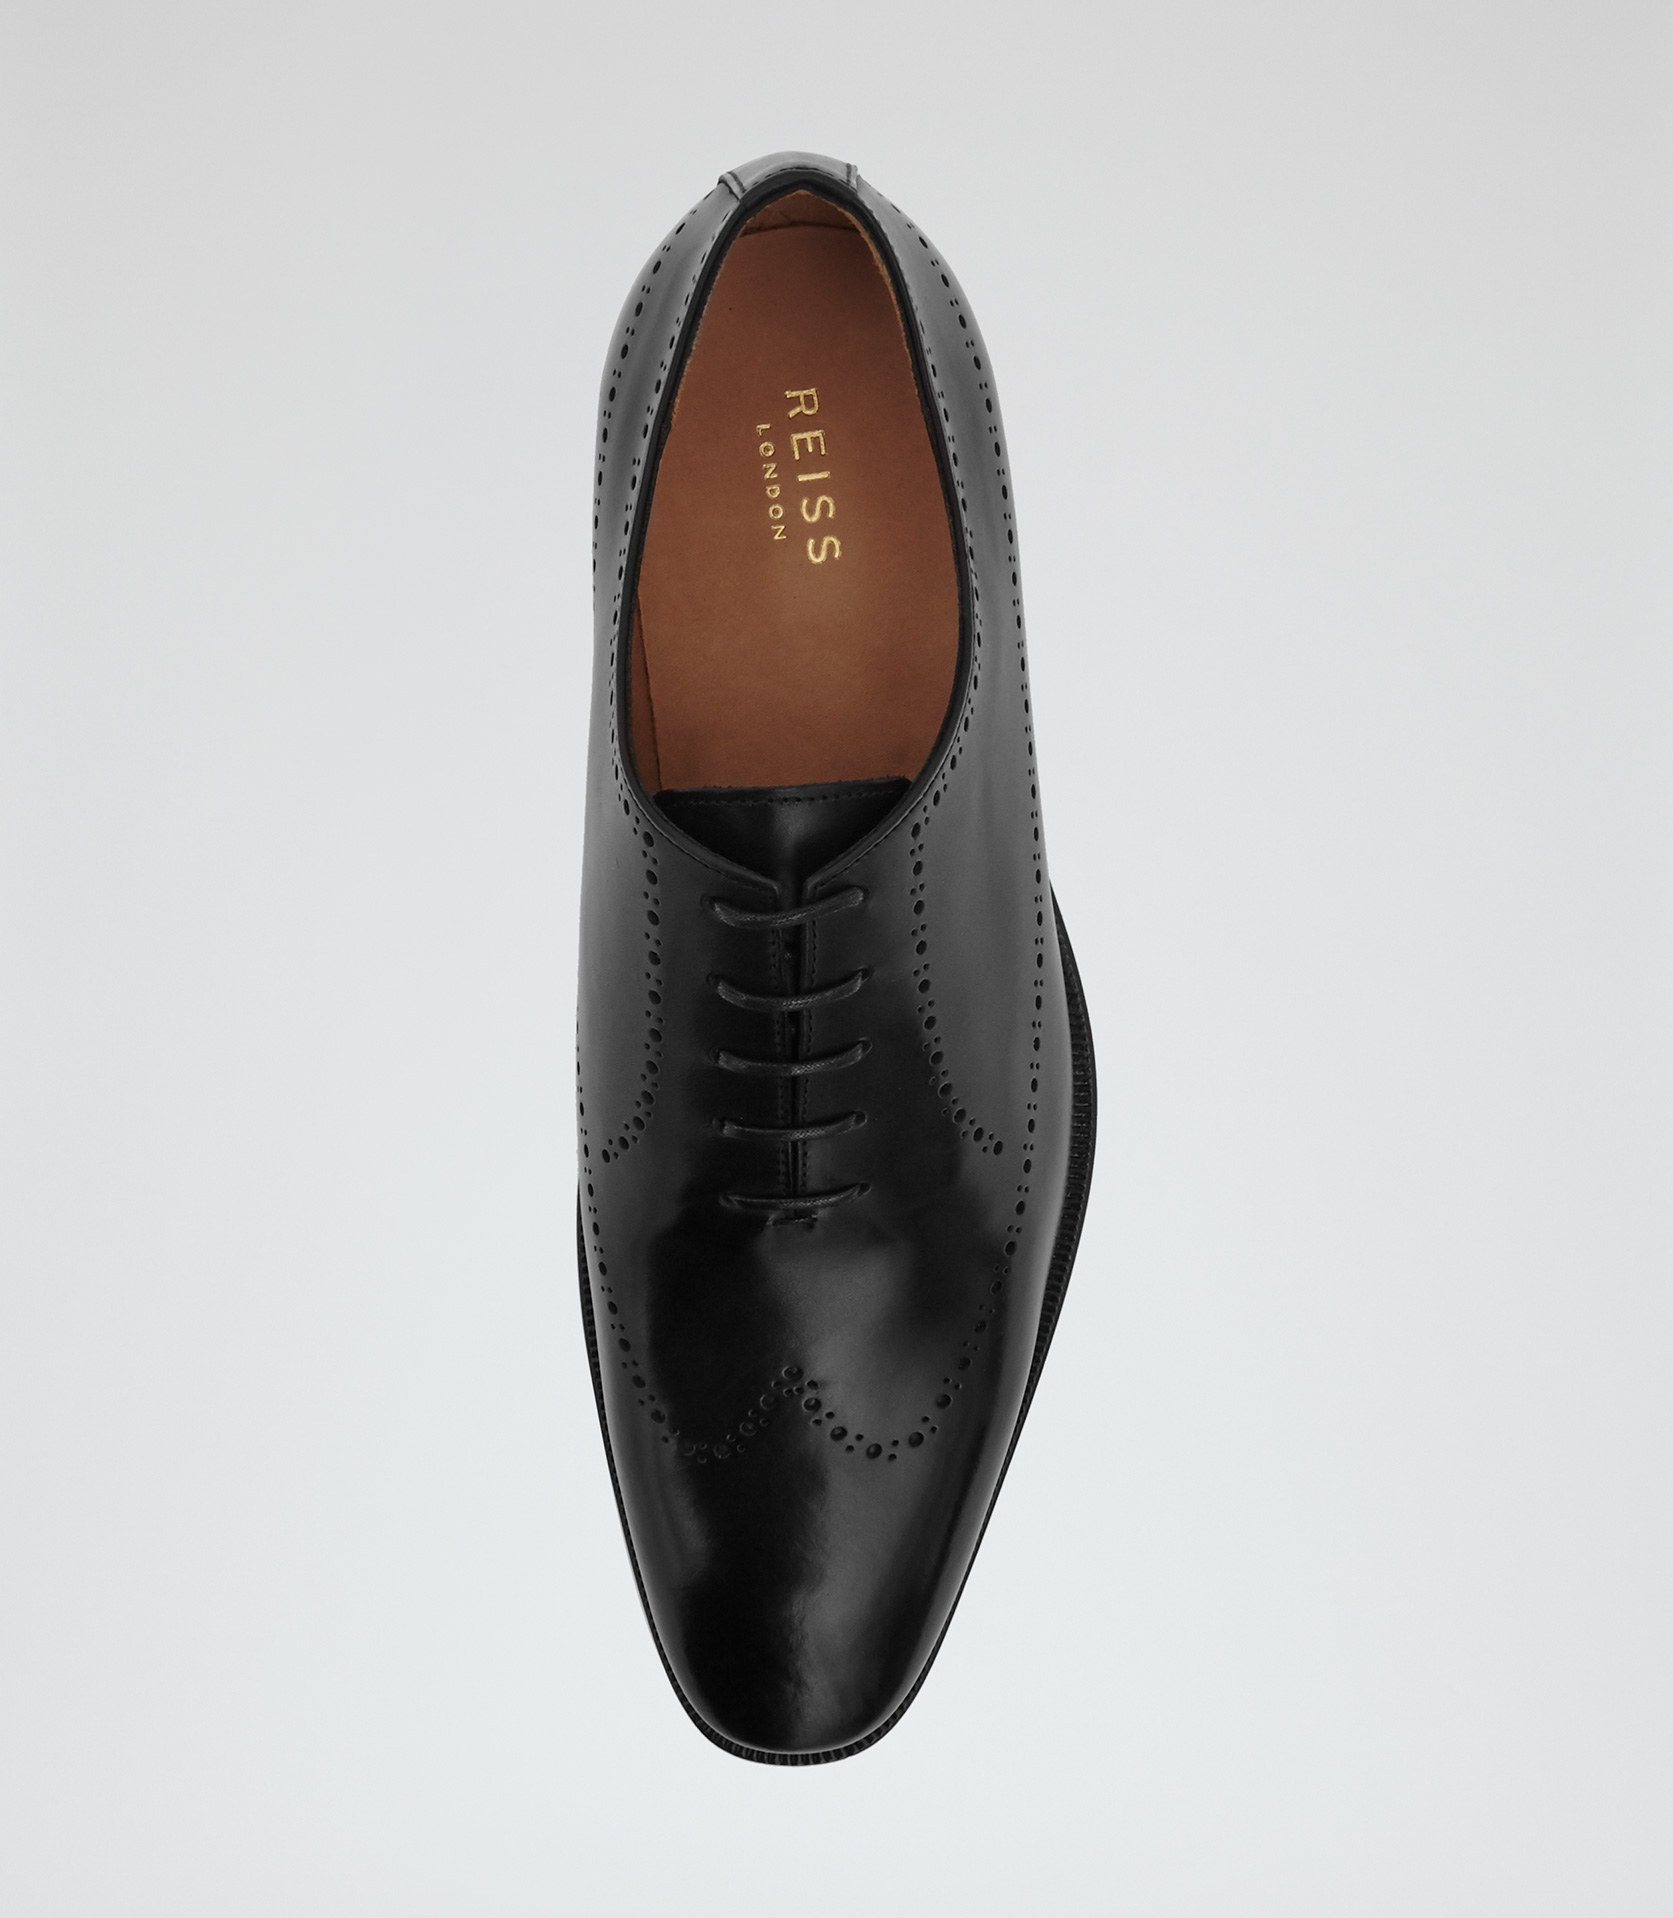 Reiss Colt Whole-cut Leather Shoes in Black for Men - Lyst